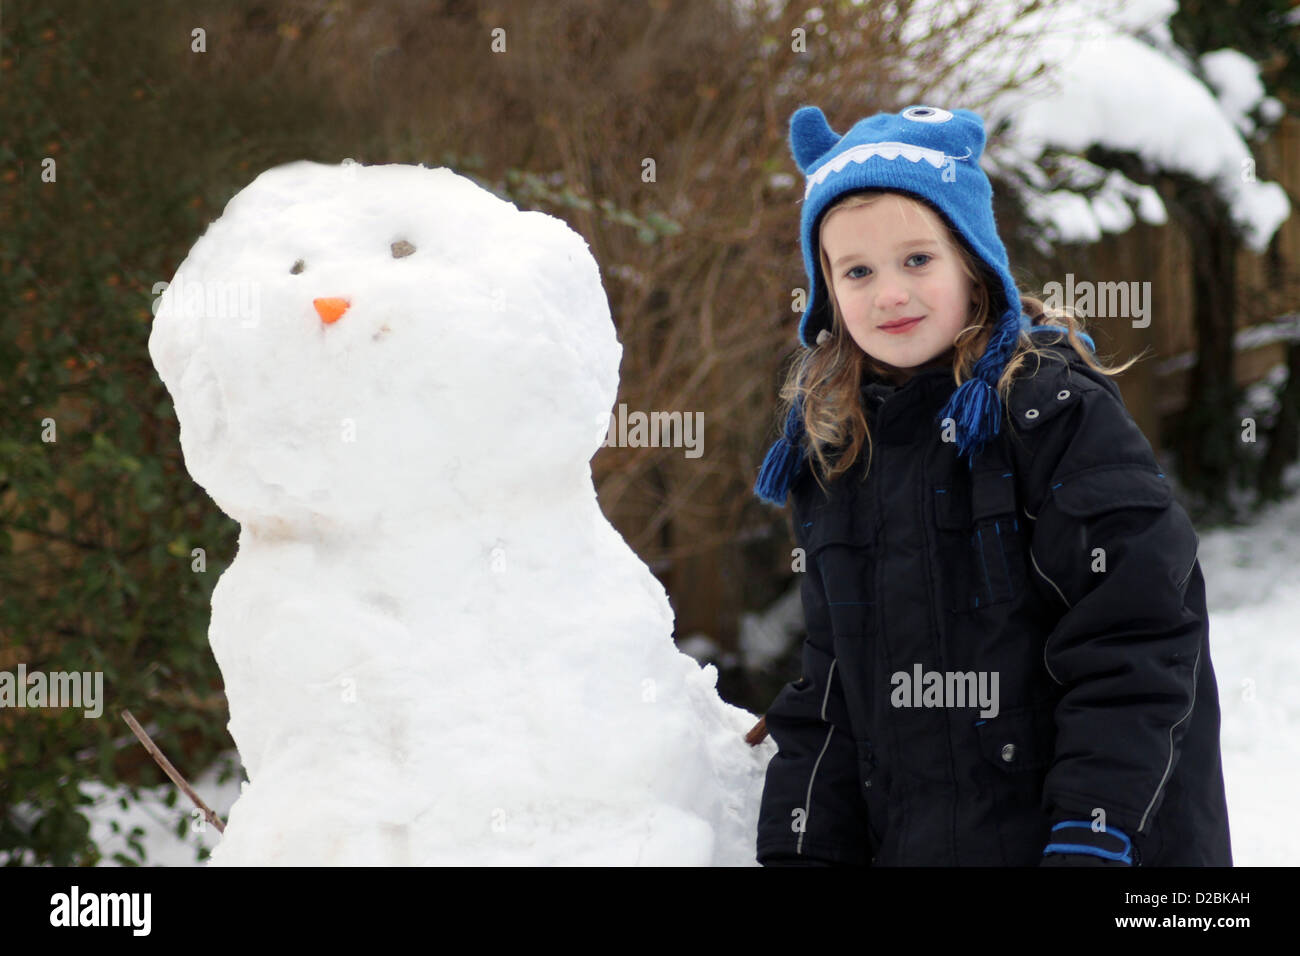 19/01/2013, Scarborough, England. 6 year old Eve Crowdy stands next to a snowman she just made in her garden with a big smile. Image is model released. Stock Photo